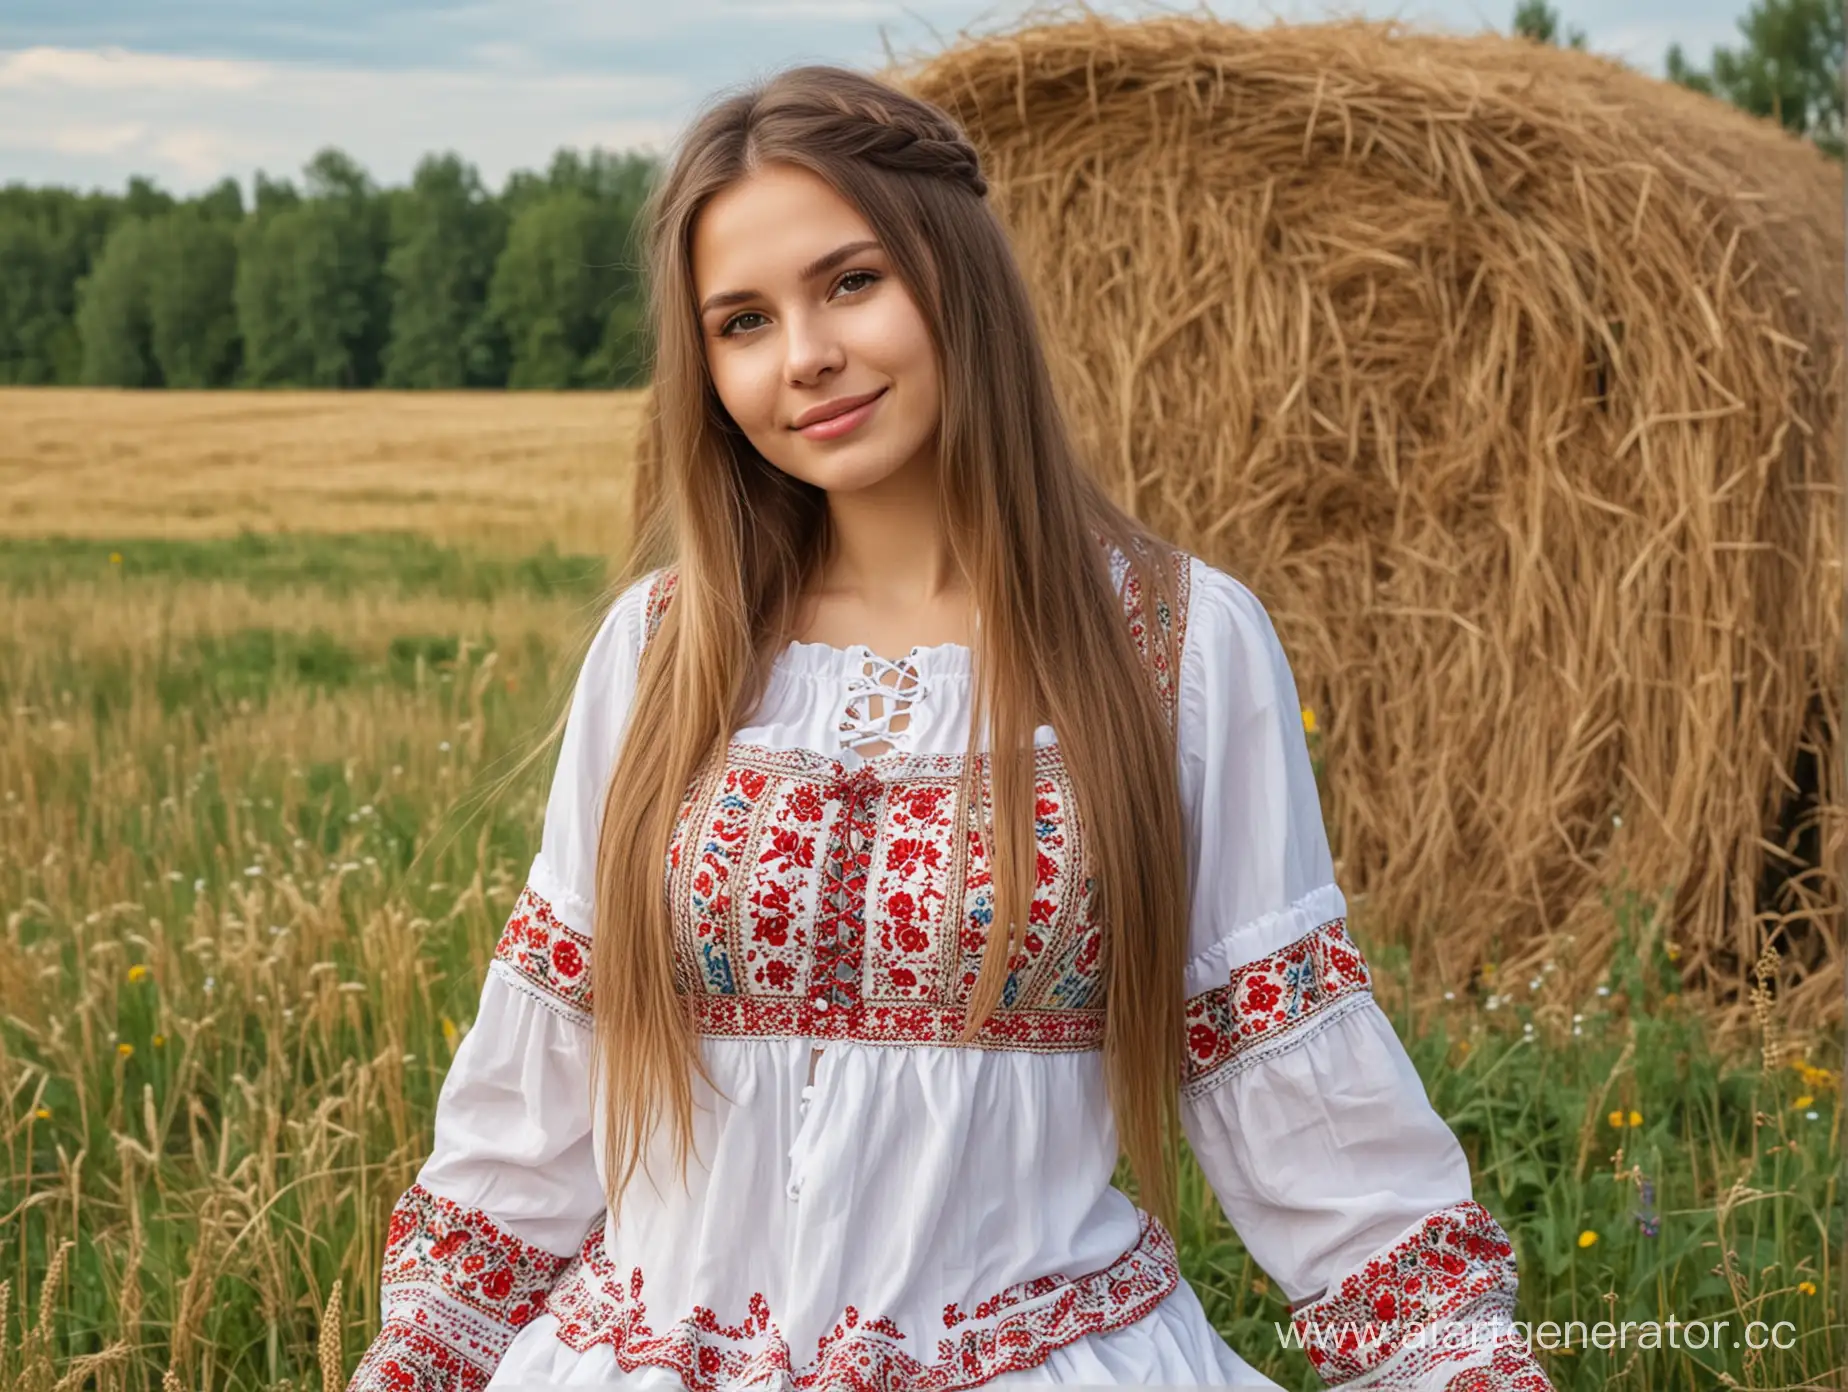 FairHaired-Russian-Beauty-in-Traditional-Costume-Posing-in-Meadow